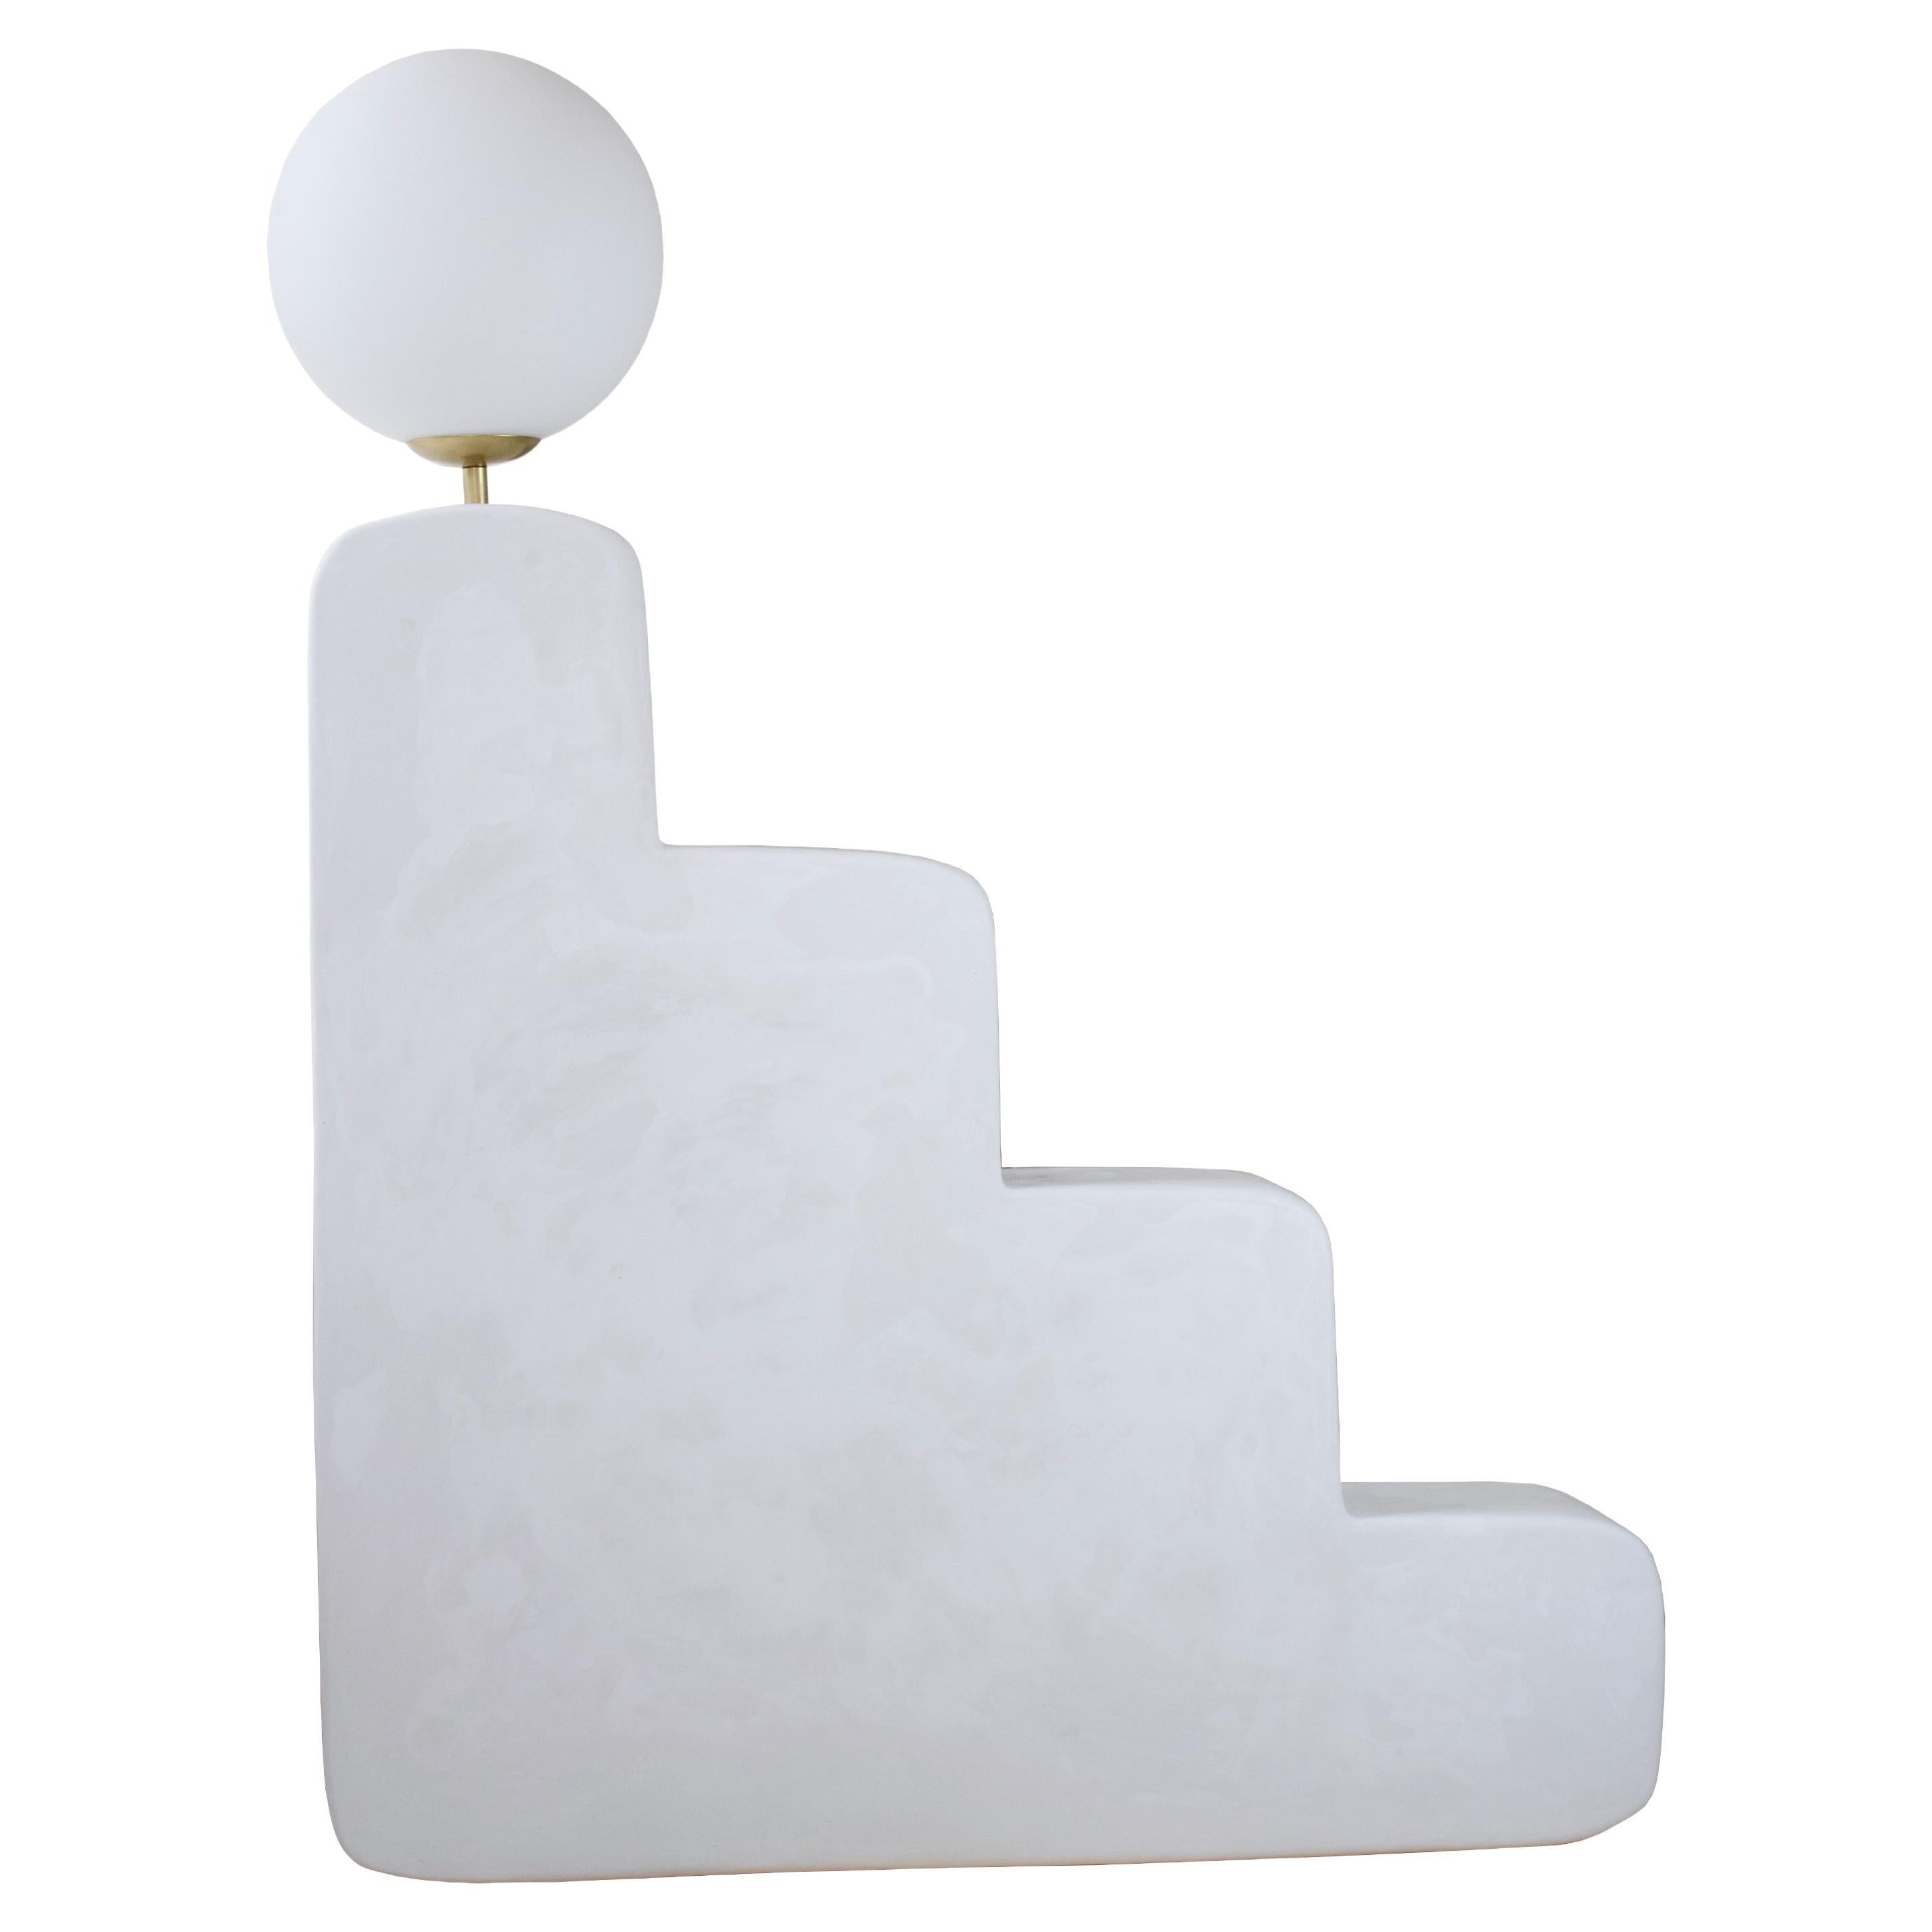 Contemporary Floor Lamp in Gypsum / Collectible Design "Step Lamp"  by AOAO